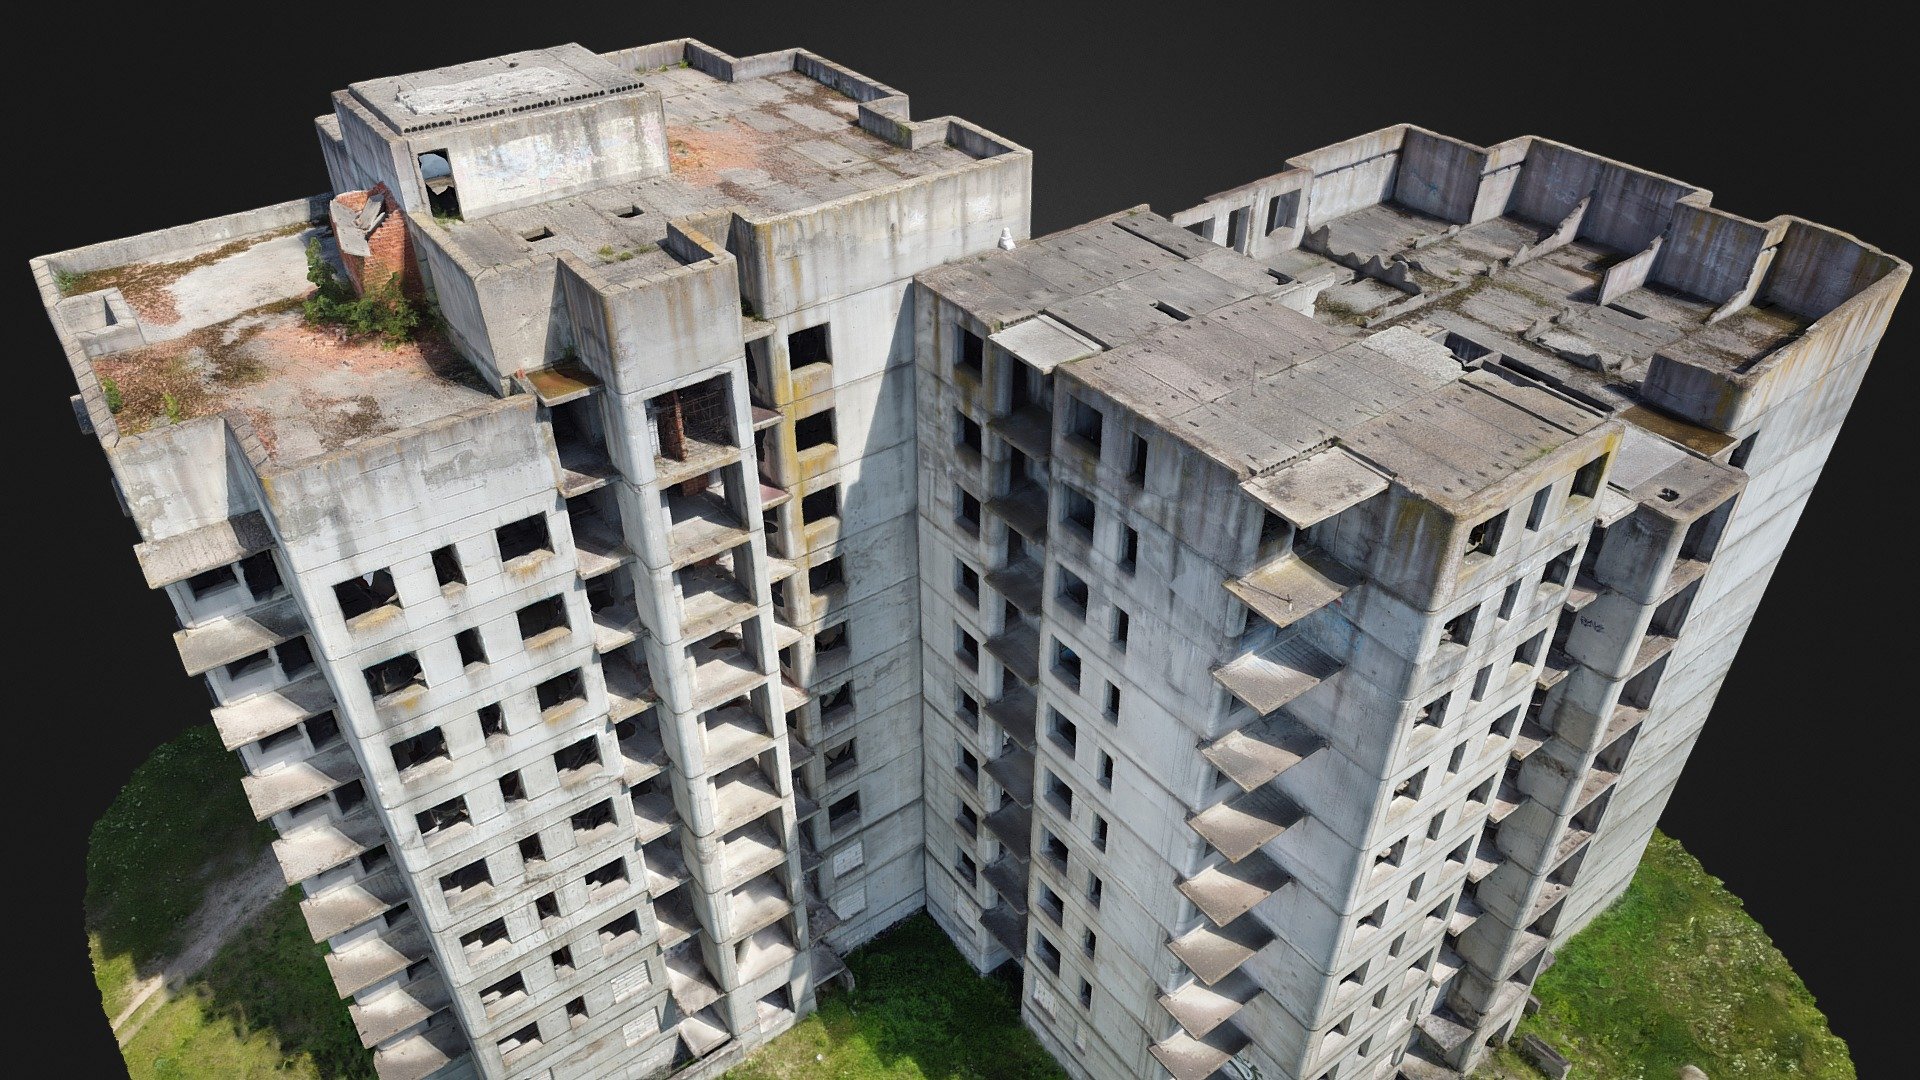 3D scan of an old, abandoned, derelict soviet apartment complex.

Empty windows, empty roof, concrete walls. 

With normal map 3d model